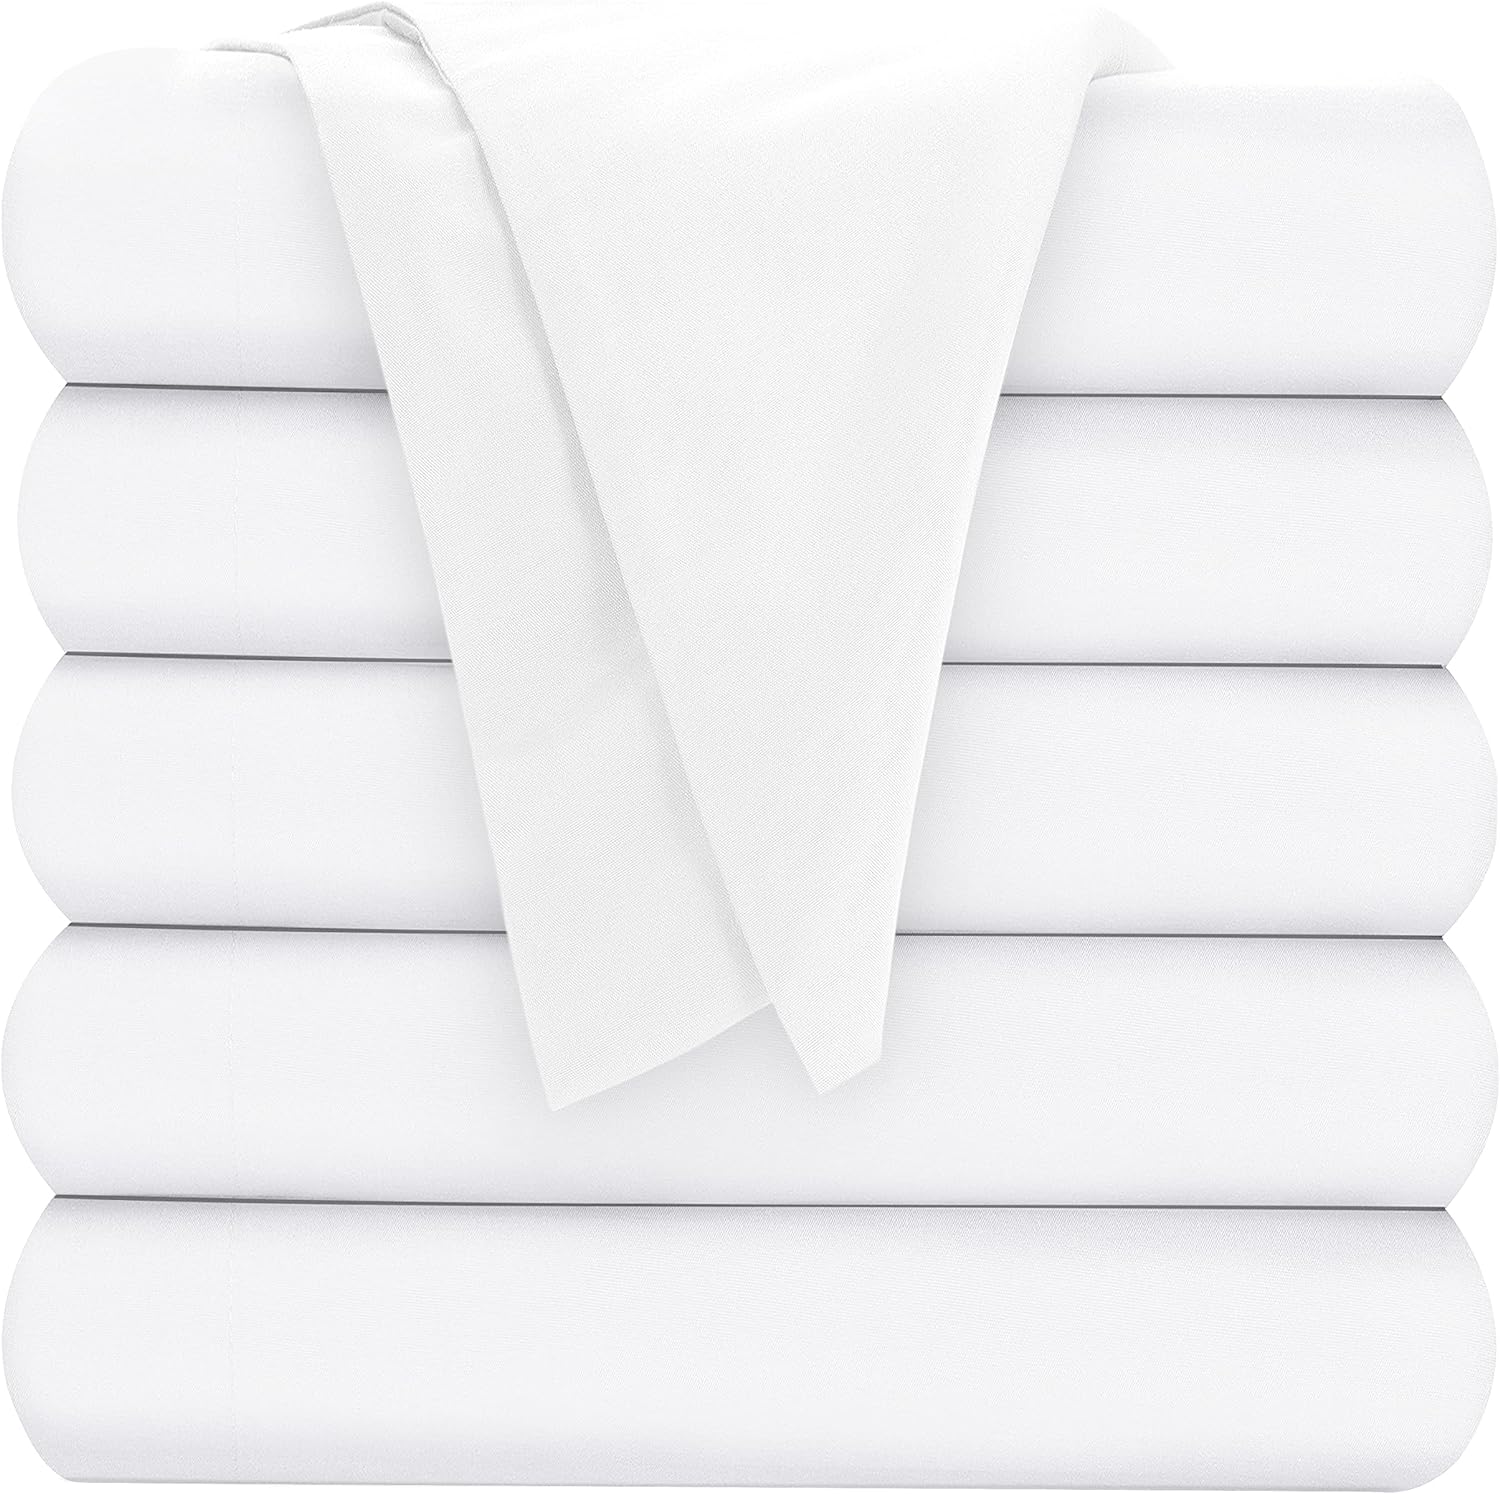 Shop our Cotton Flat Sheets Pack of 4 today!